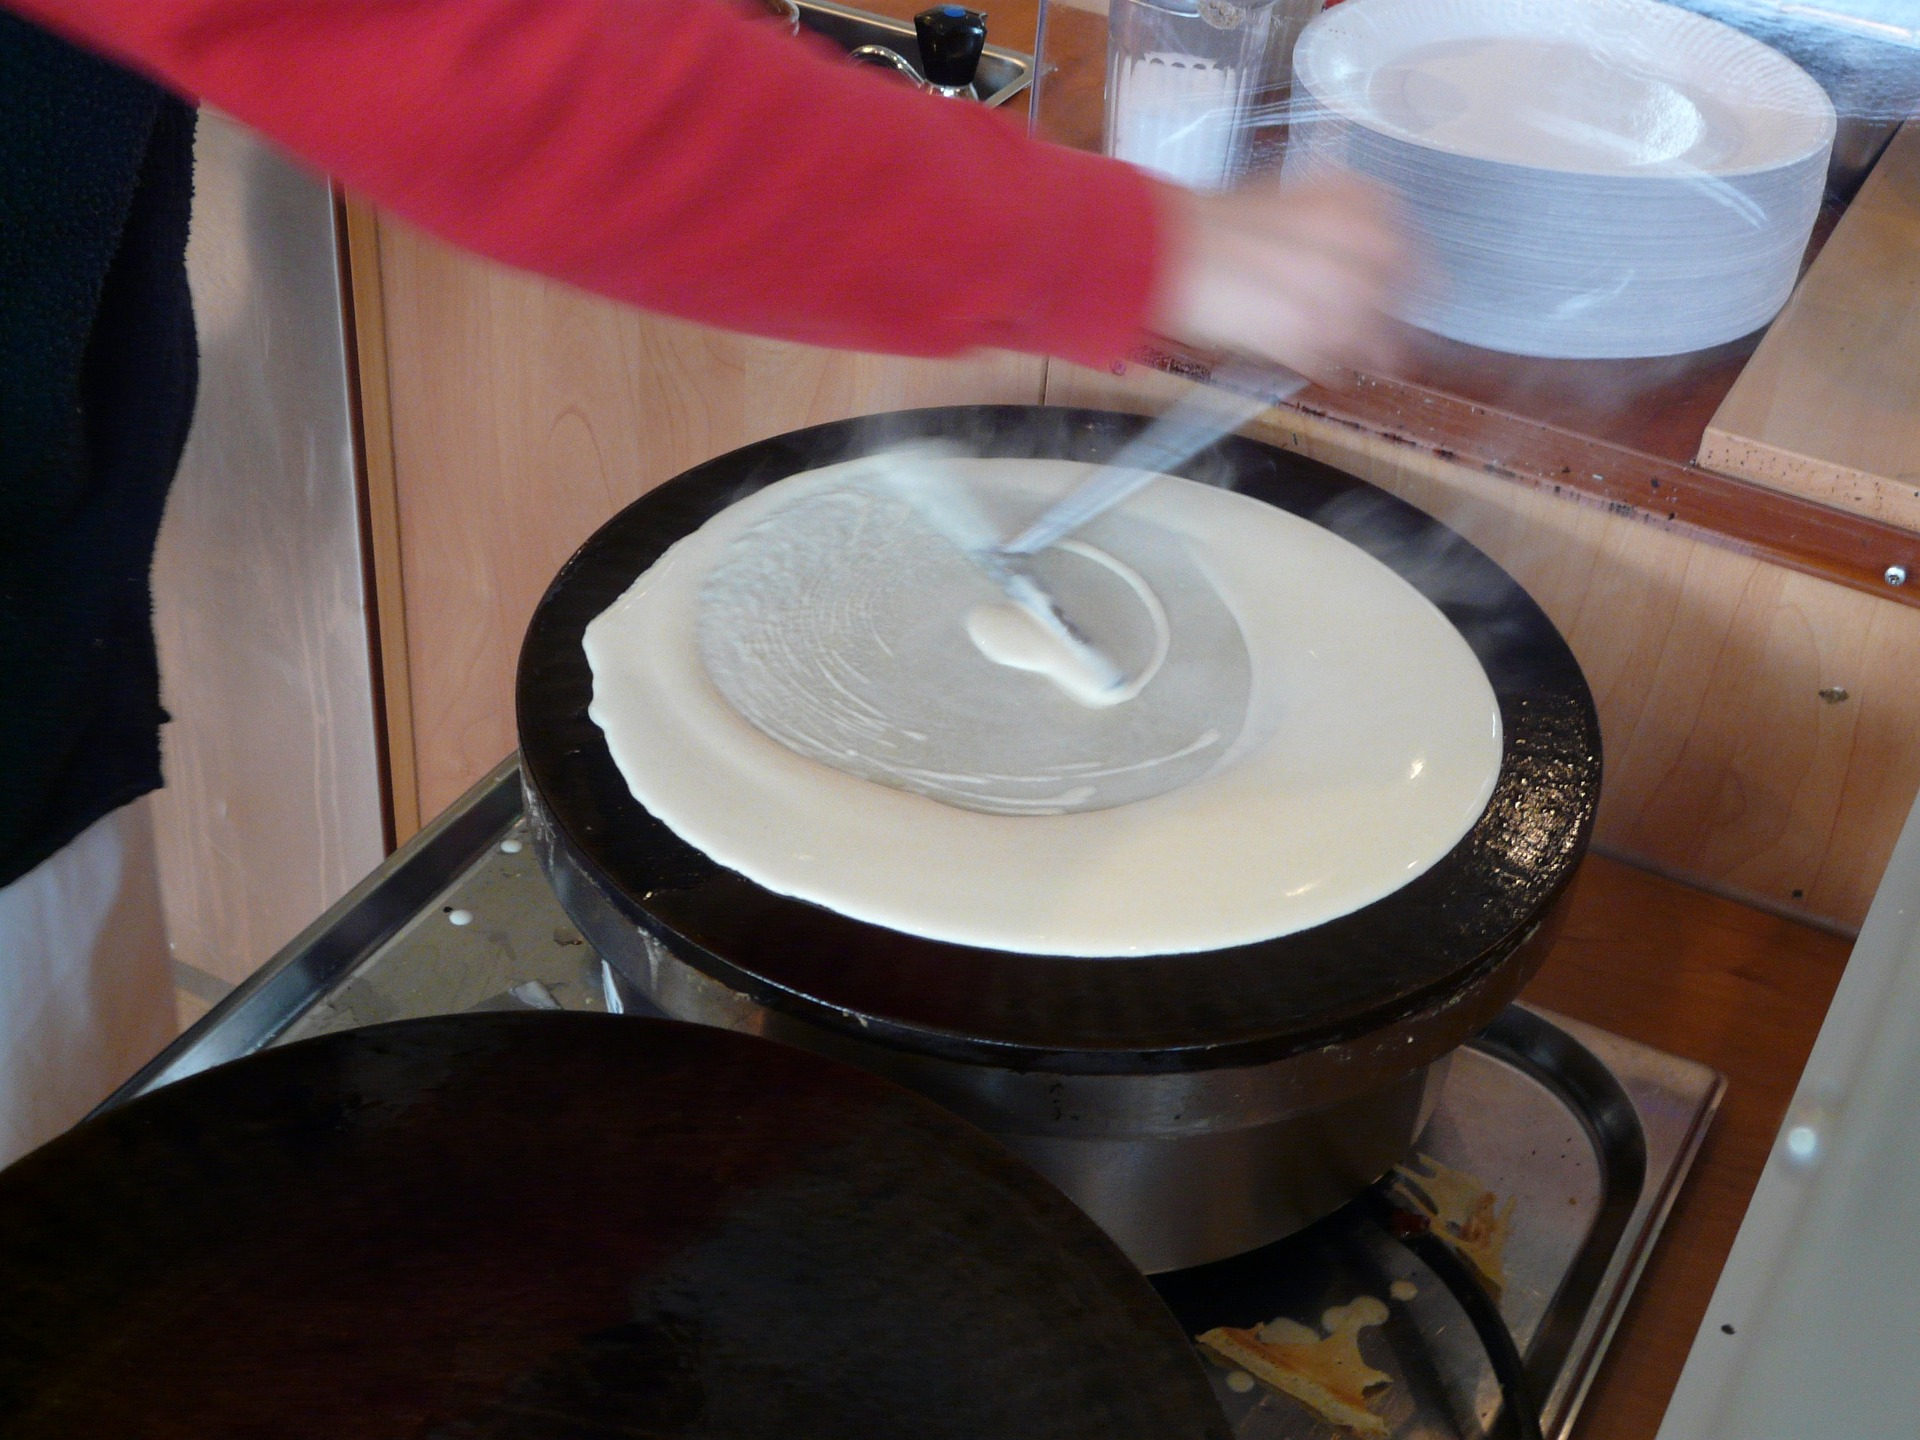 What Do You Consider Before Purchasing a Comal Pan for Tortillas?